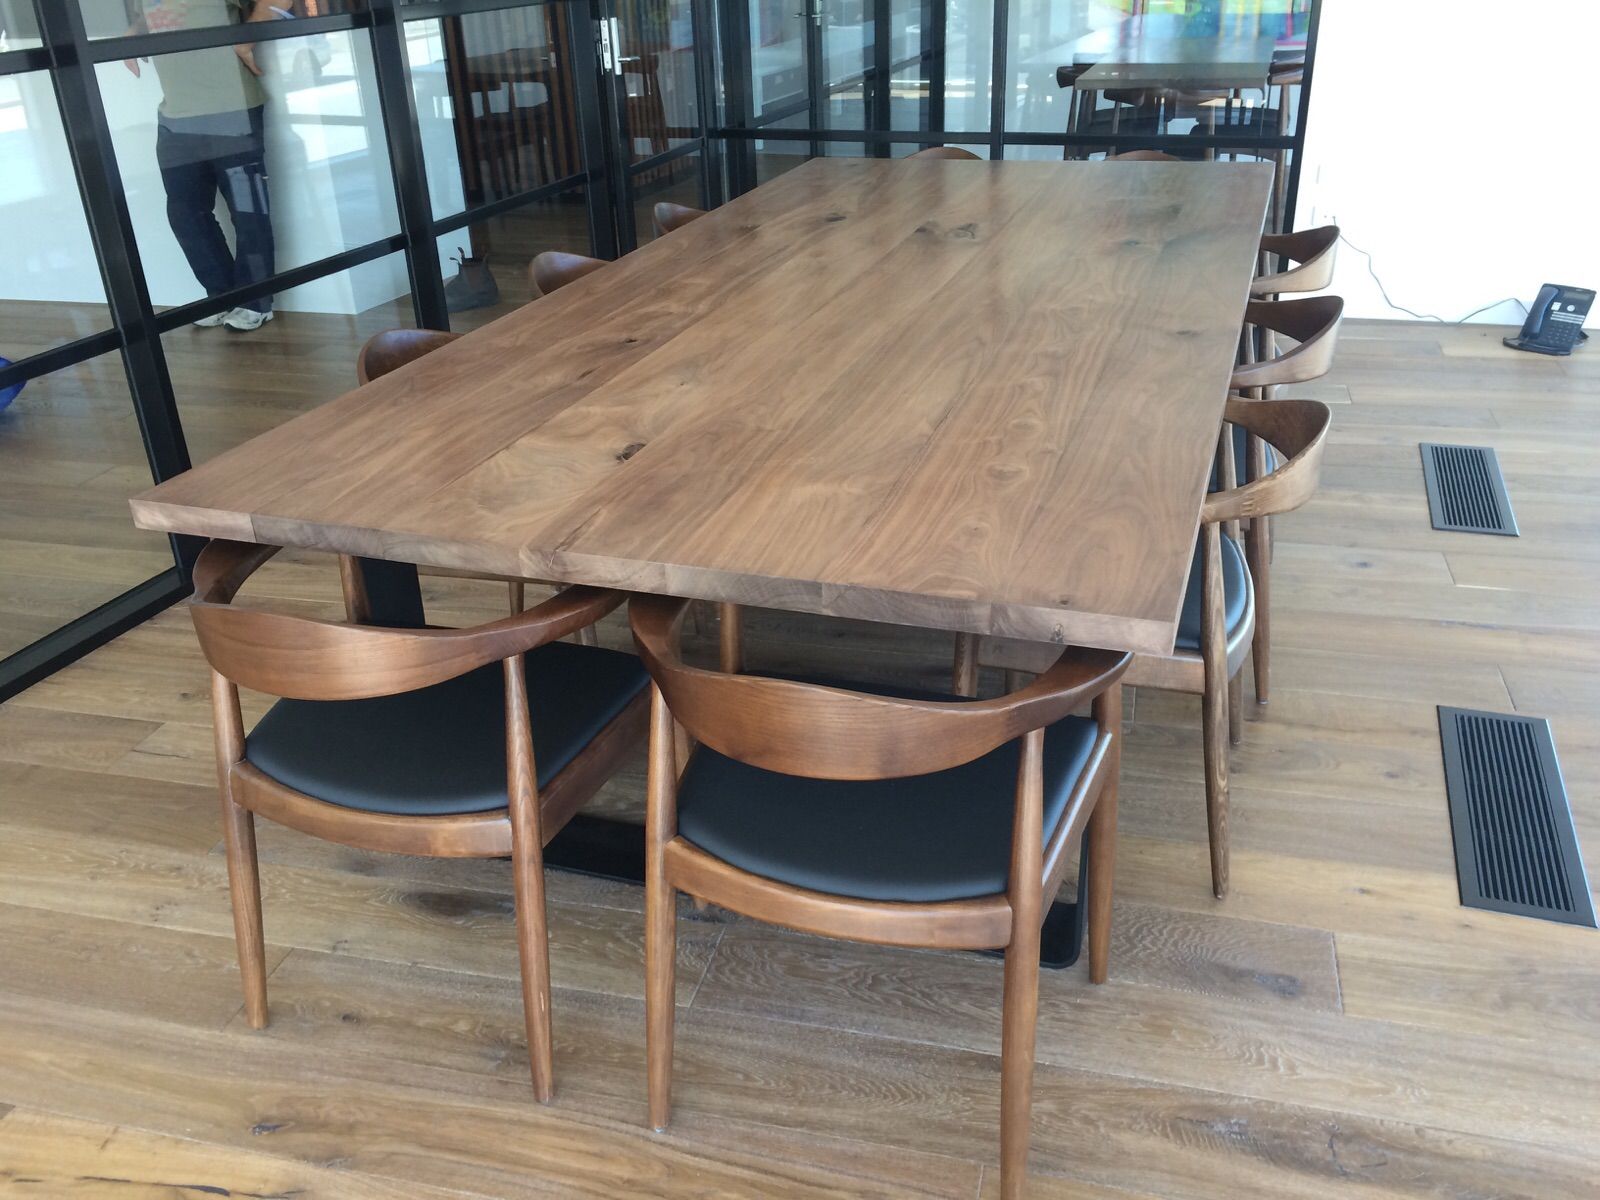 King Dining Table American Black Walnut – Lumber Furniture Throughout Most Up To Date Black And Walnut Dining Tables (View 12 of 15)